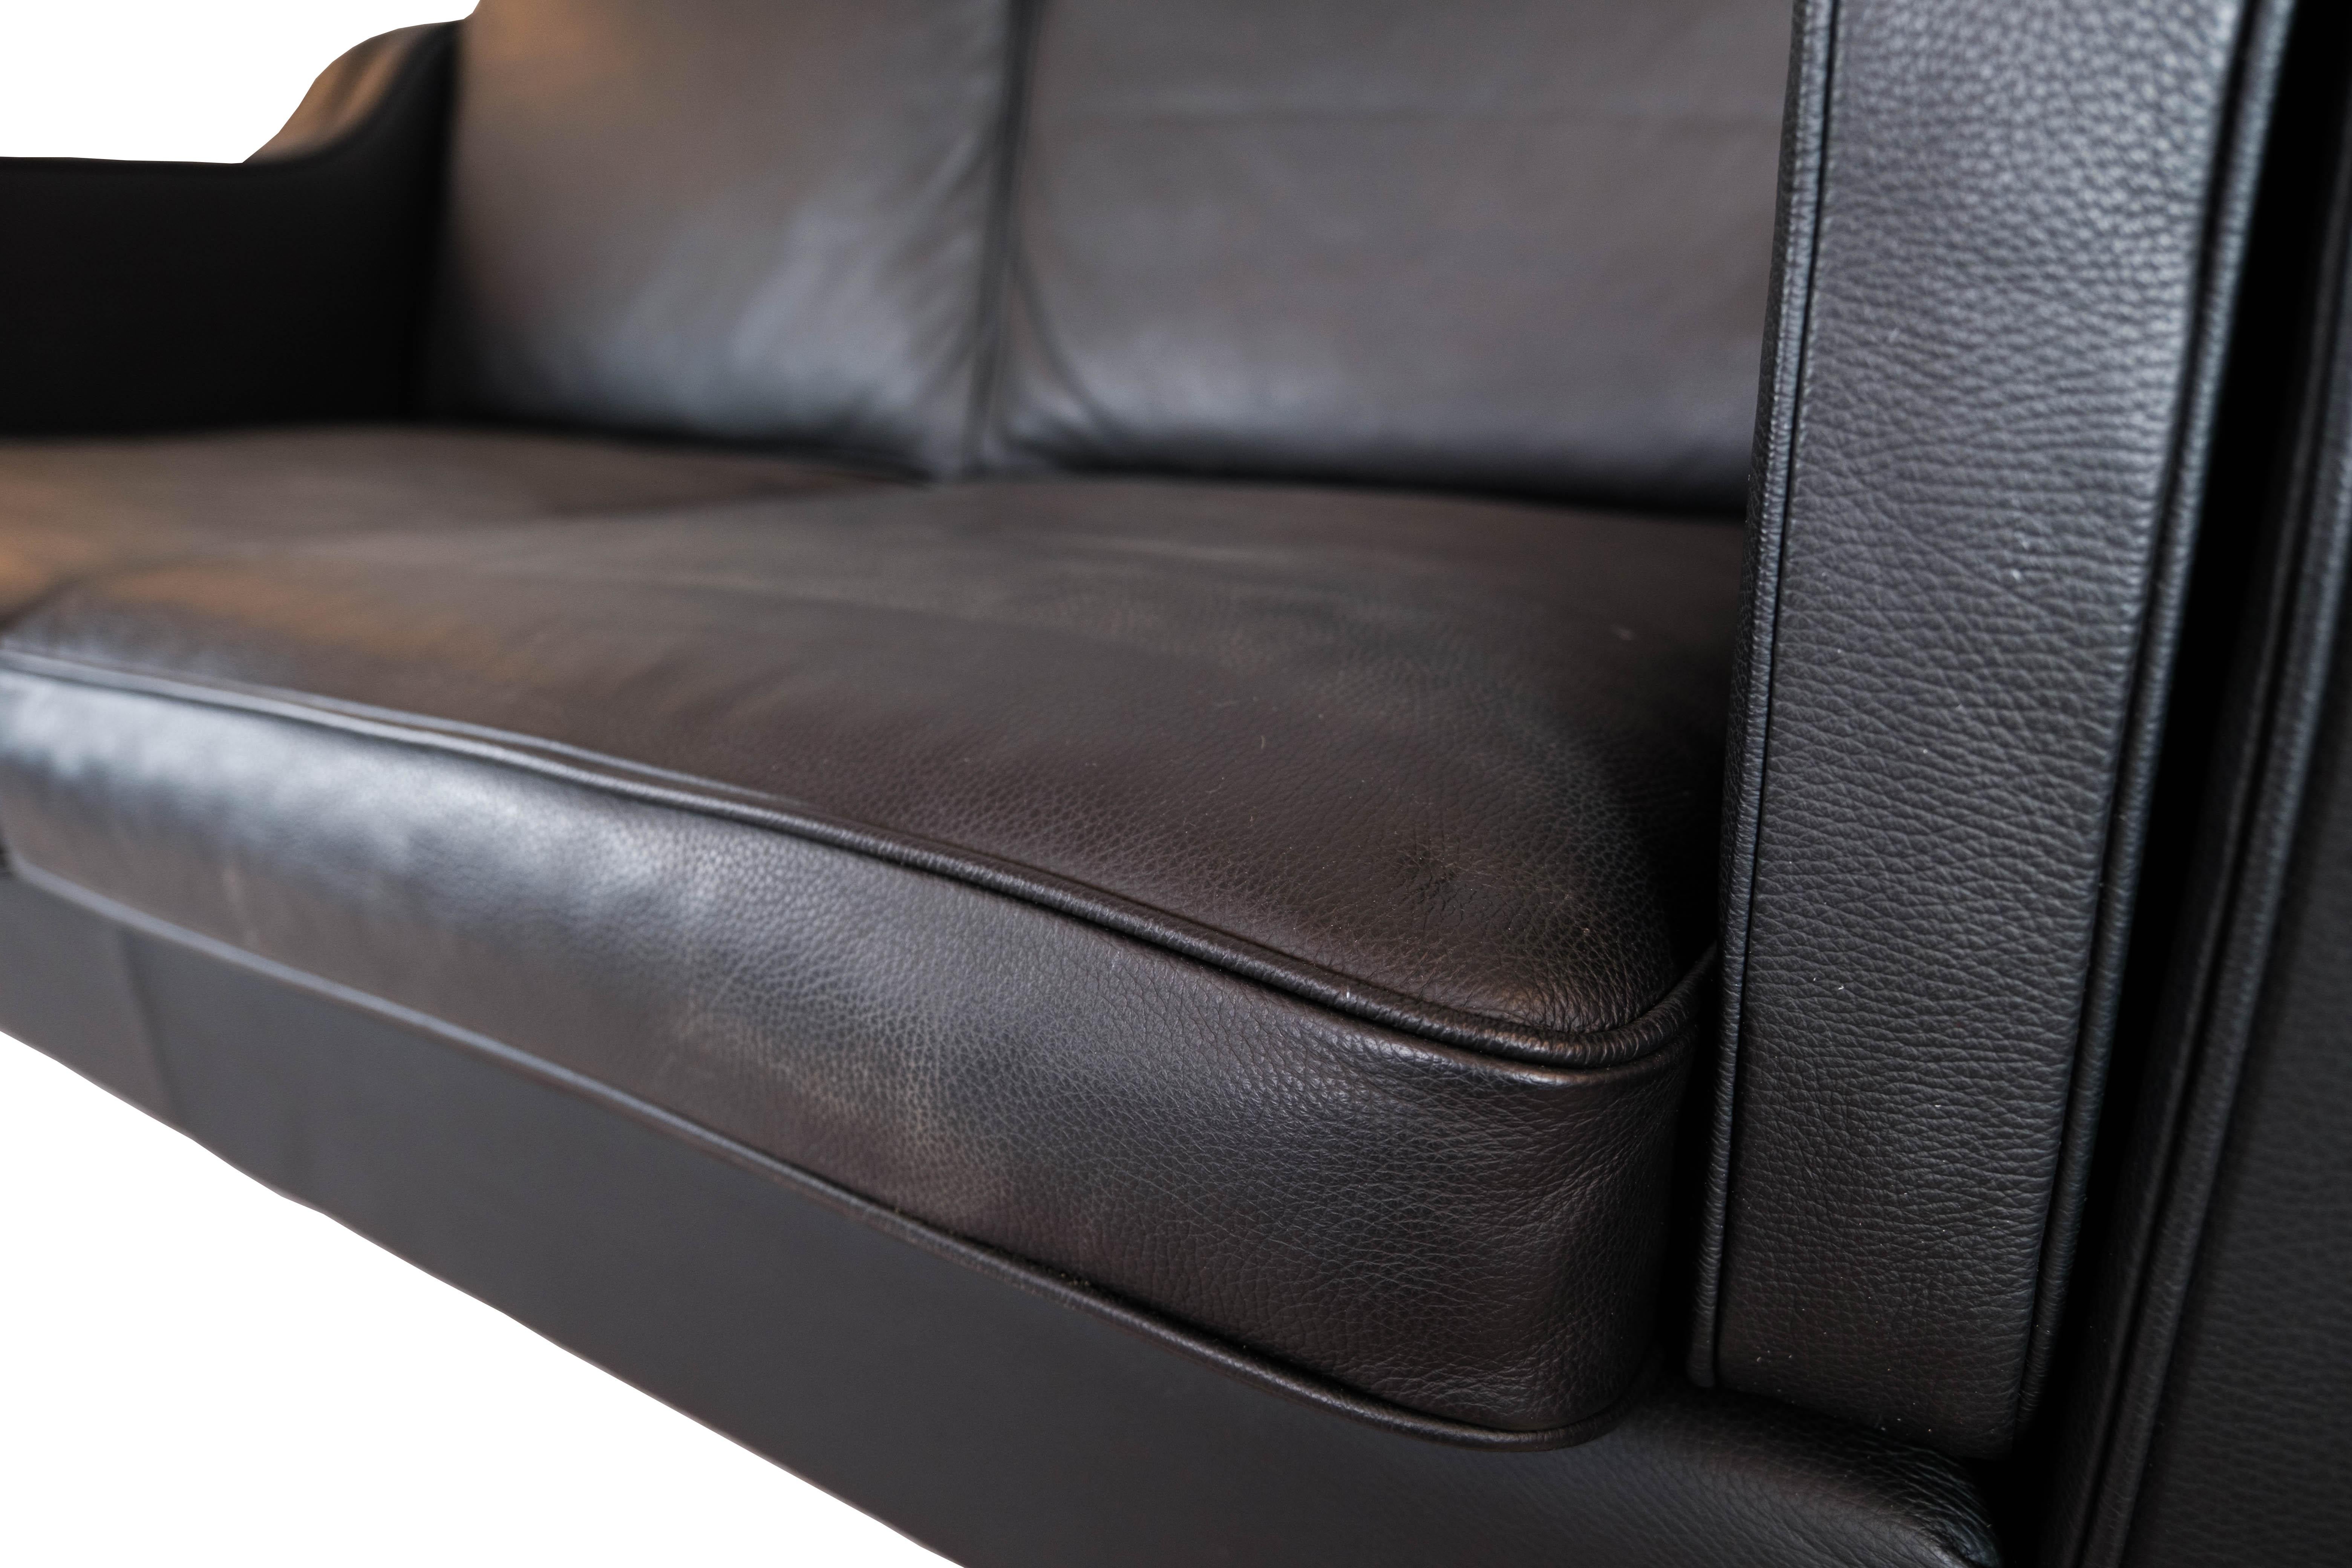 Danish Black Leather 2 Seater Sofa with Legs of Oak, Manufactured by Stouby Furniture